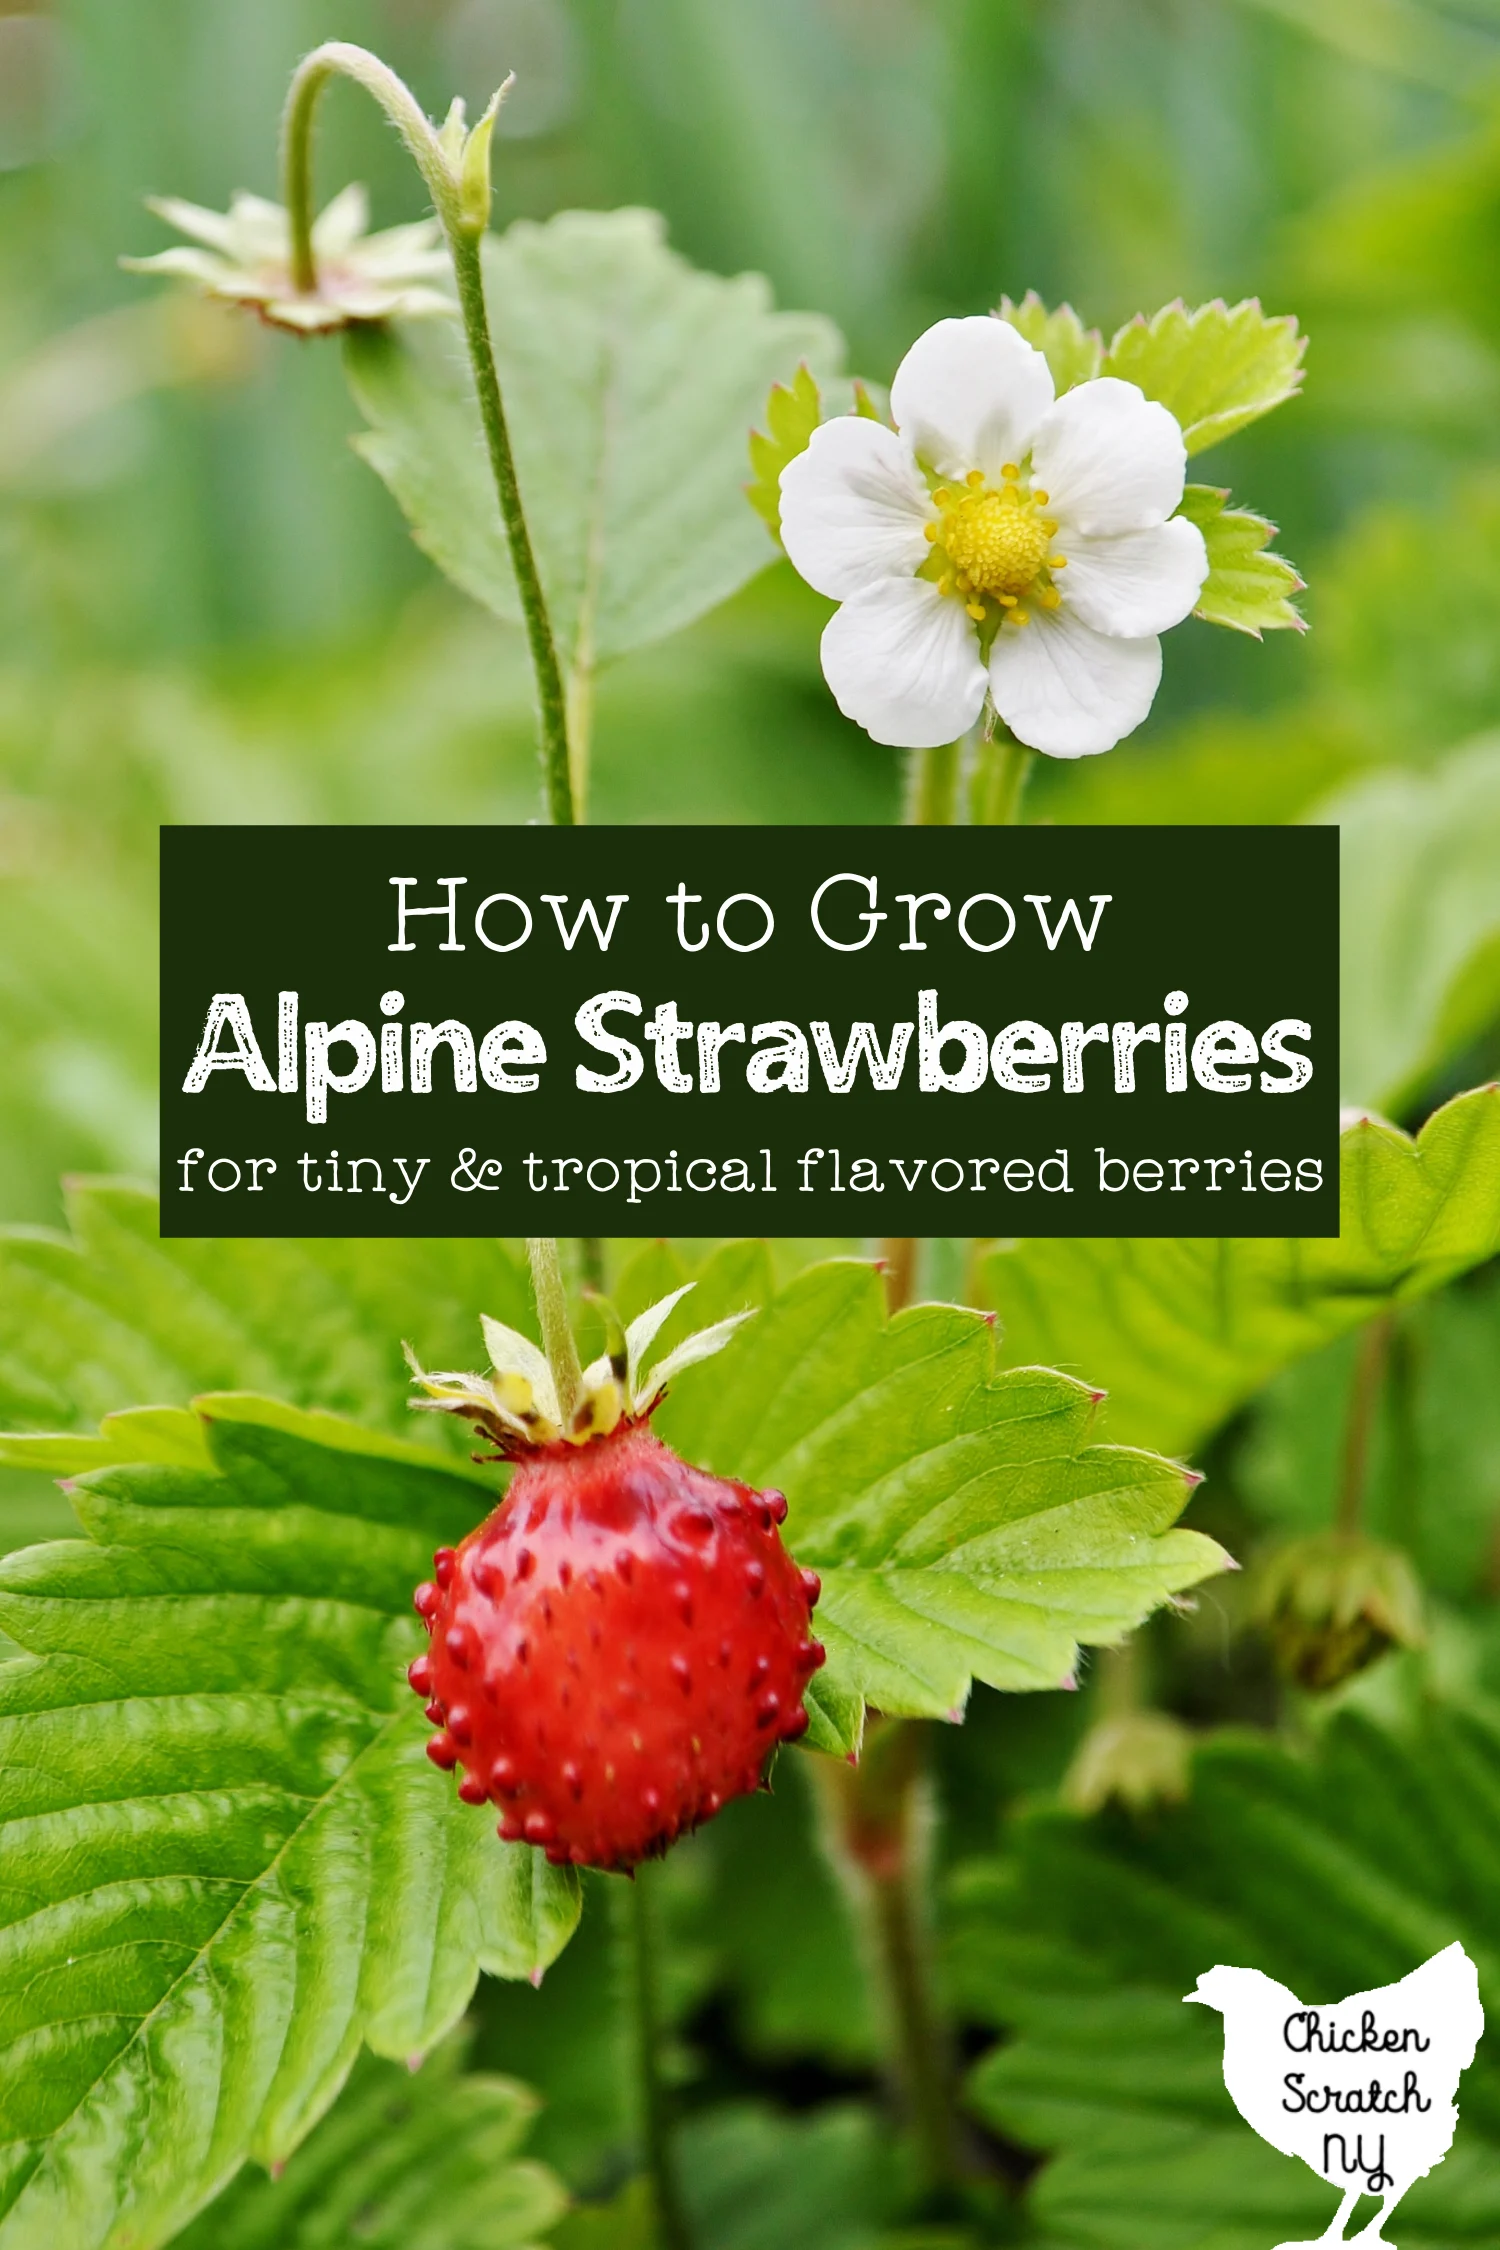 small red alpine strawberry on a stalk with a white strawberry flower in front of green leaves with text overlay "how to grow alpine strawberries"